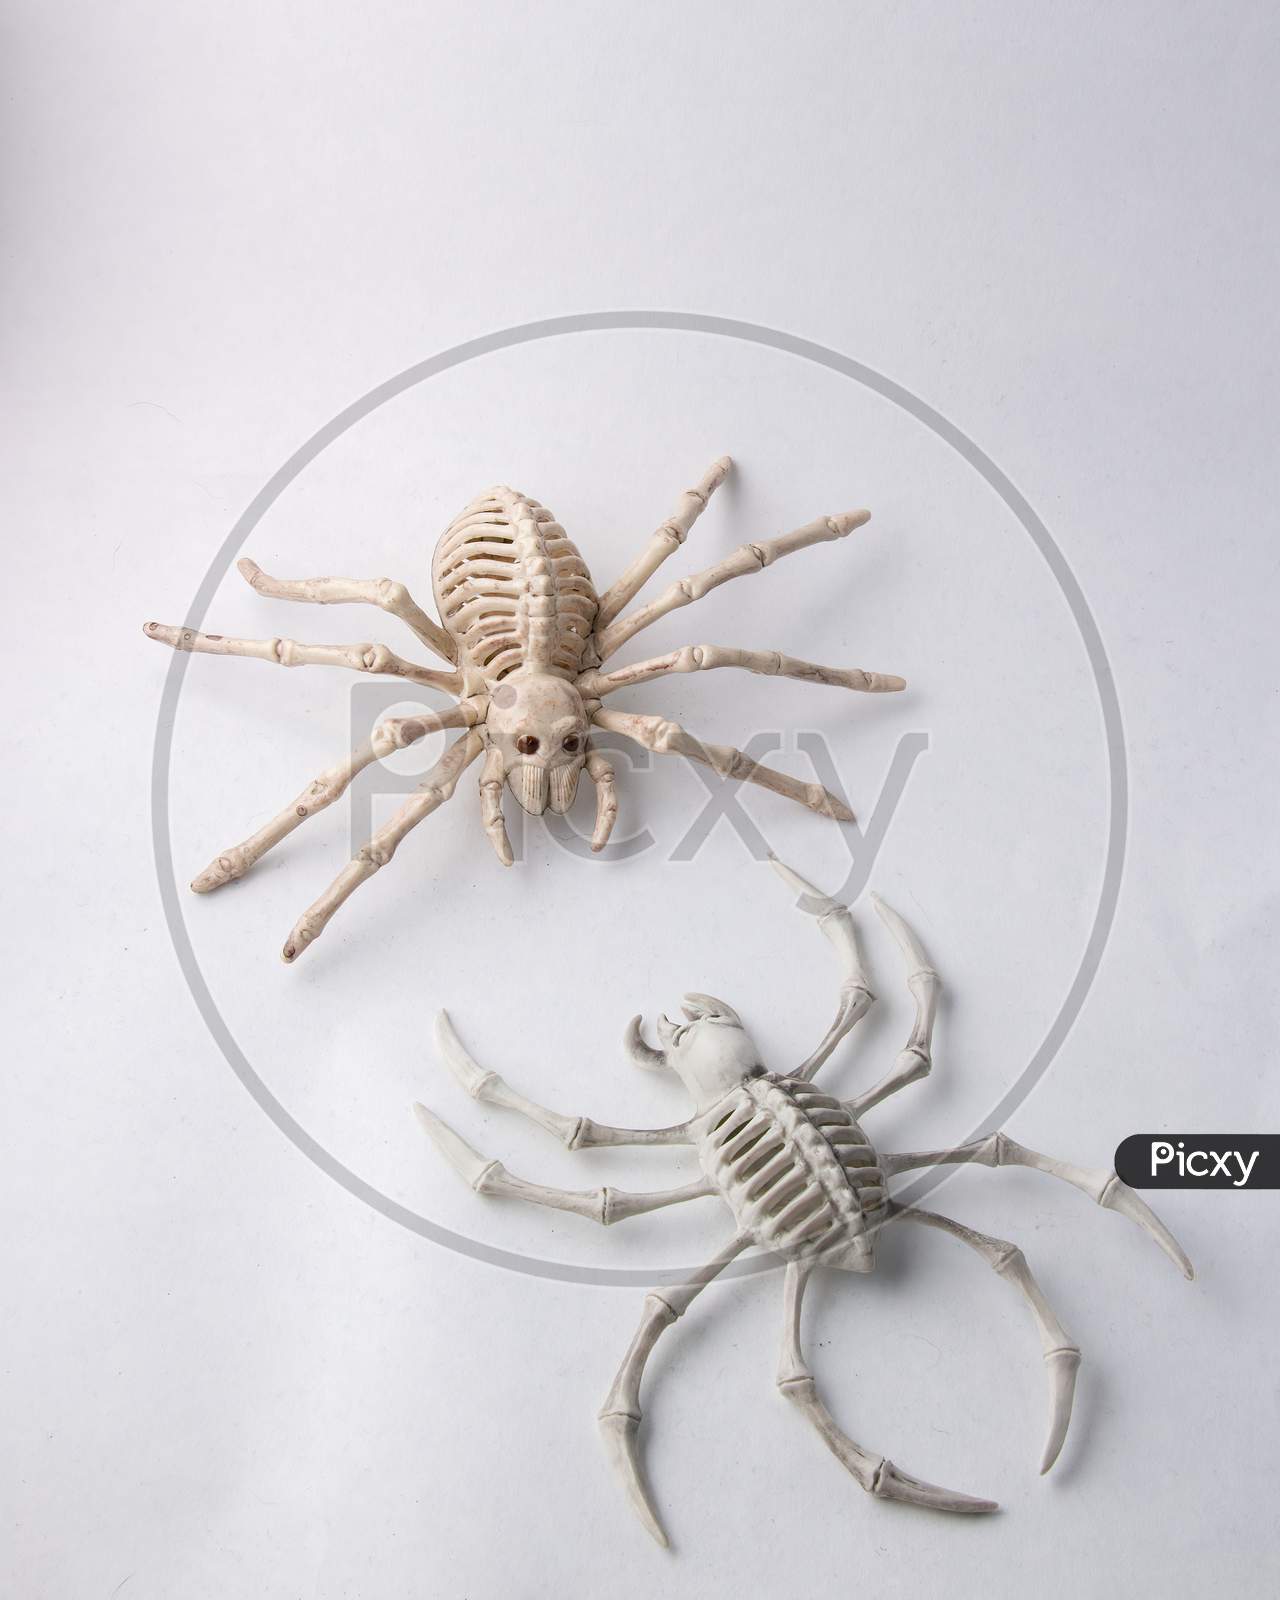 2 Scary Spider Skeletons Halloween Decorations Isolated On White